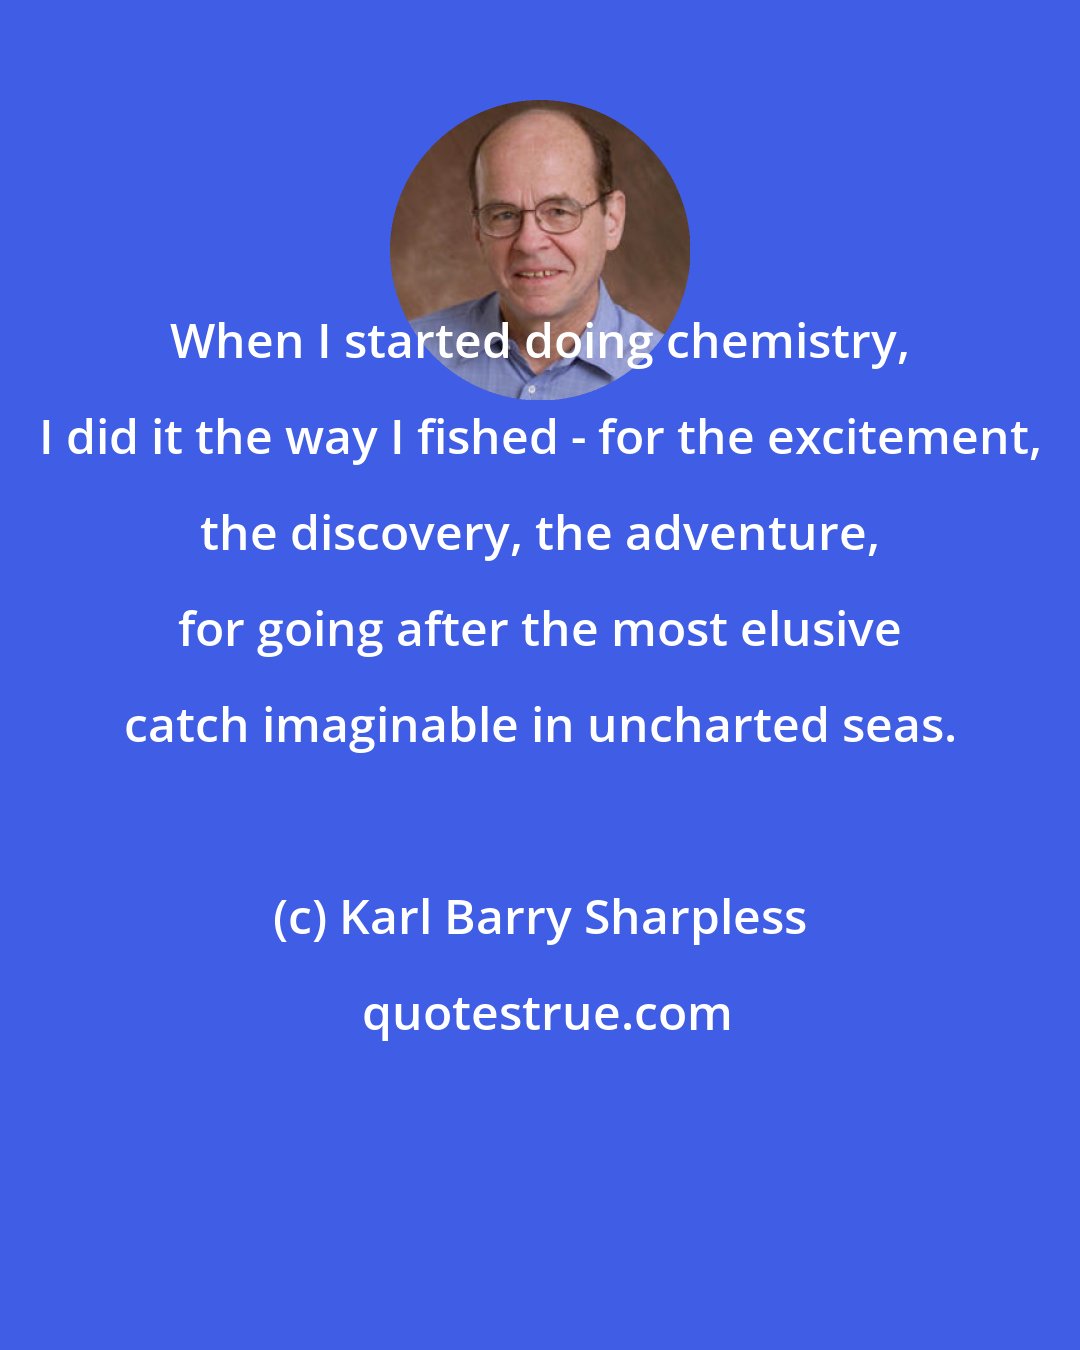 Karl Barry Sharpless: When I started doing chemistry, I did it the way I fished - for the excitement, the discovery, the adventure, for going after the most elusive catch imaginable in uncharted seas.